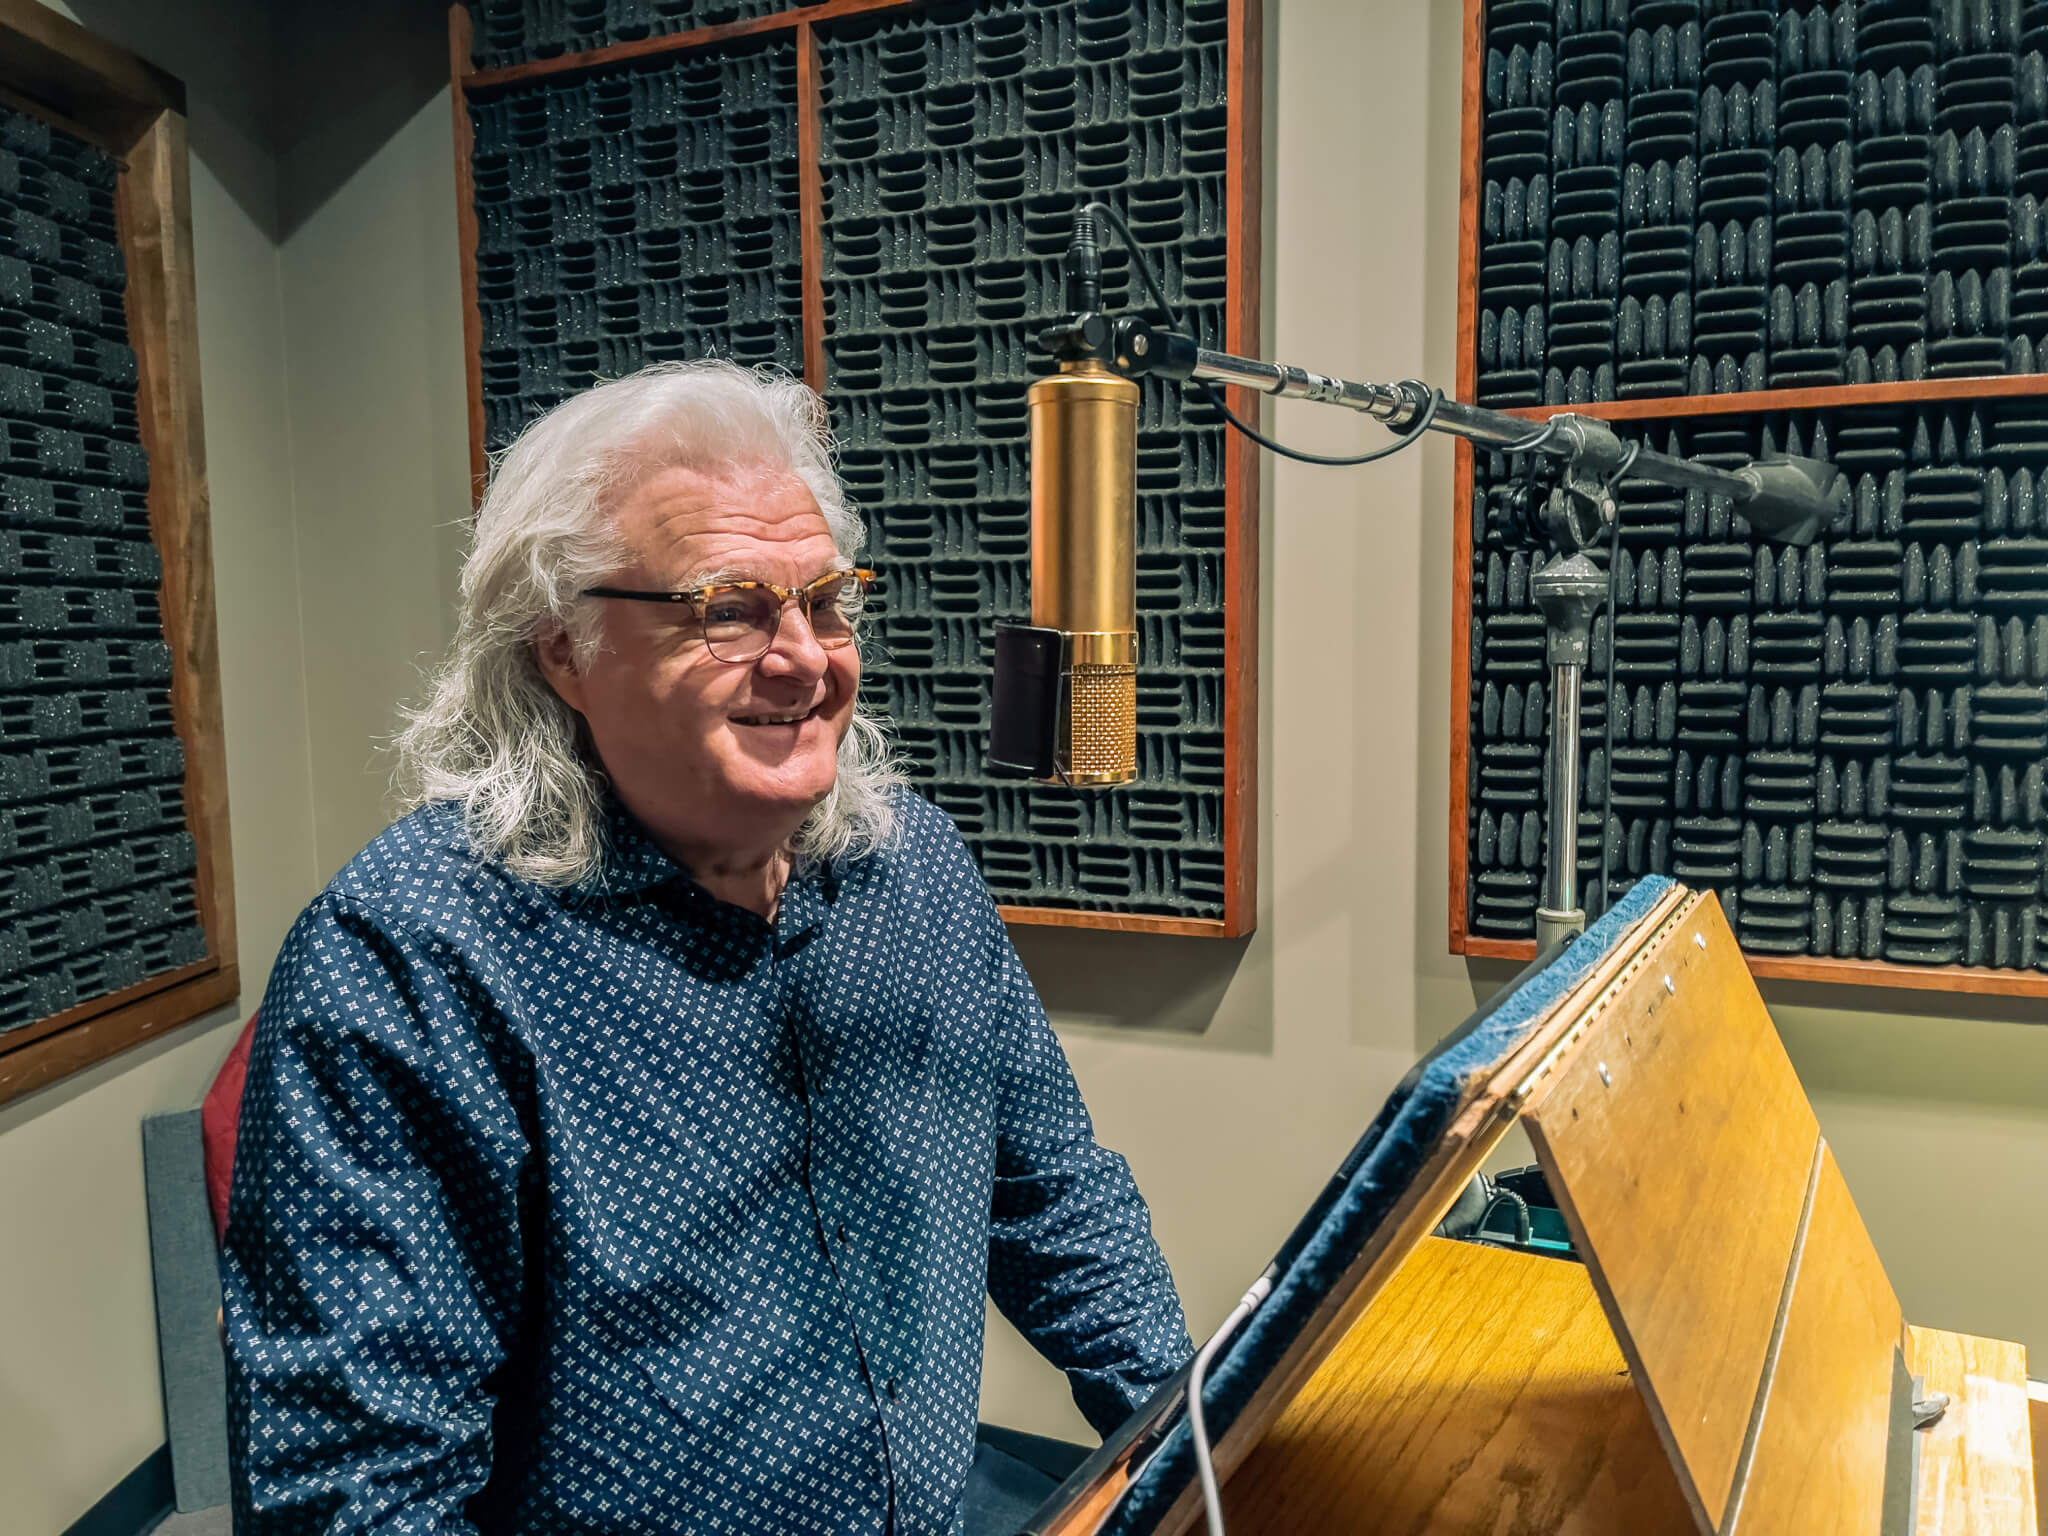 Ricky Skaggs in audio recording booth